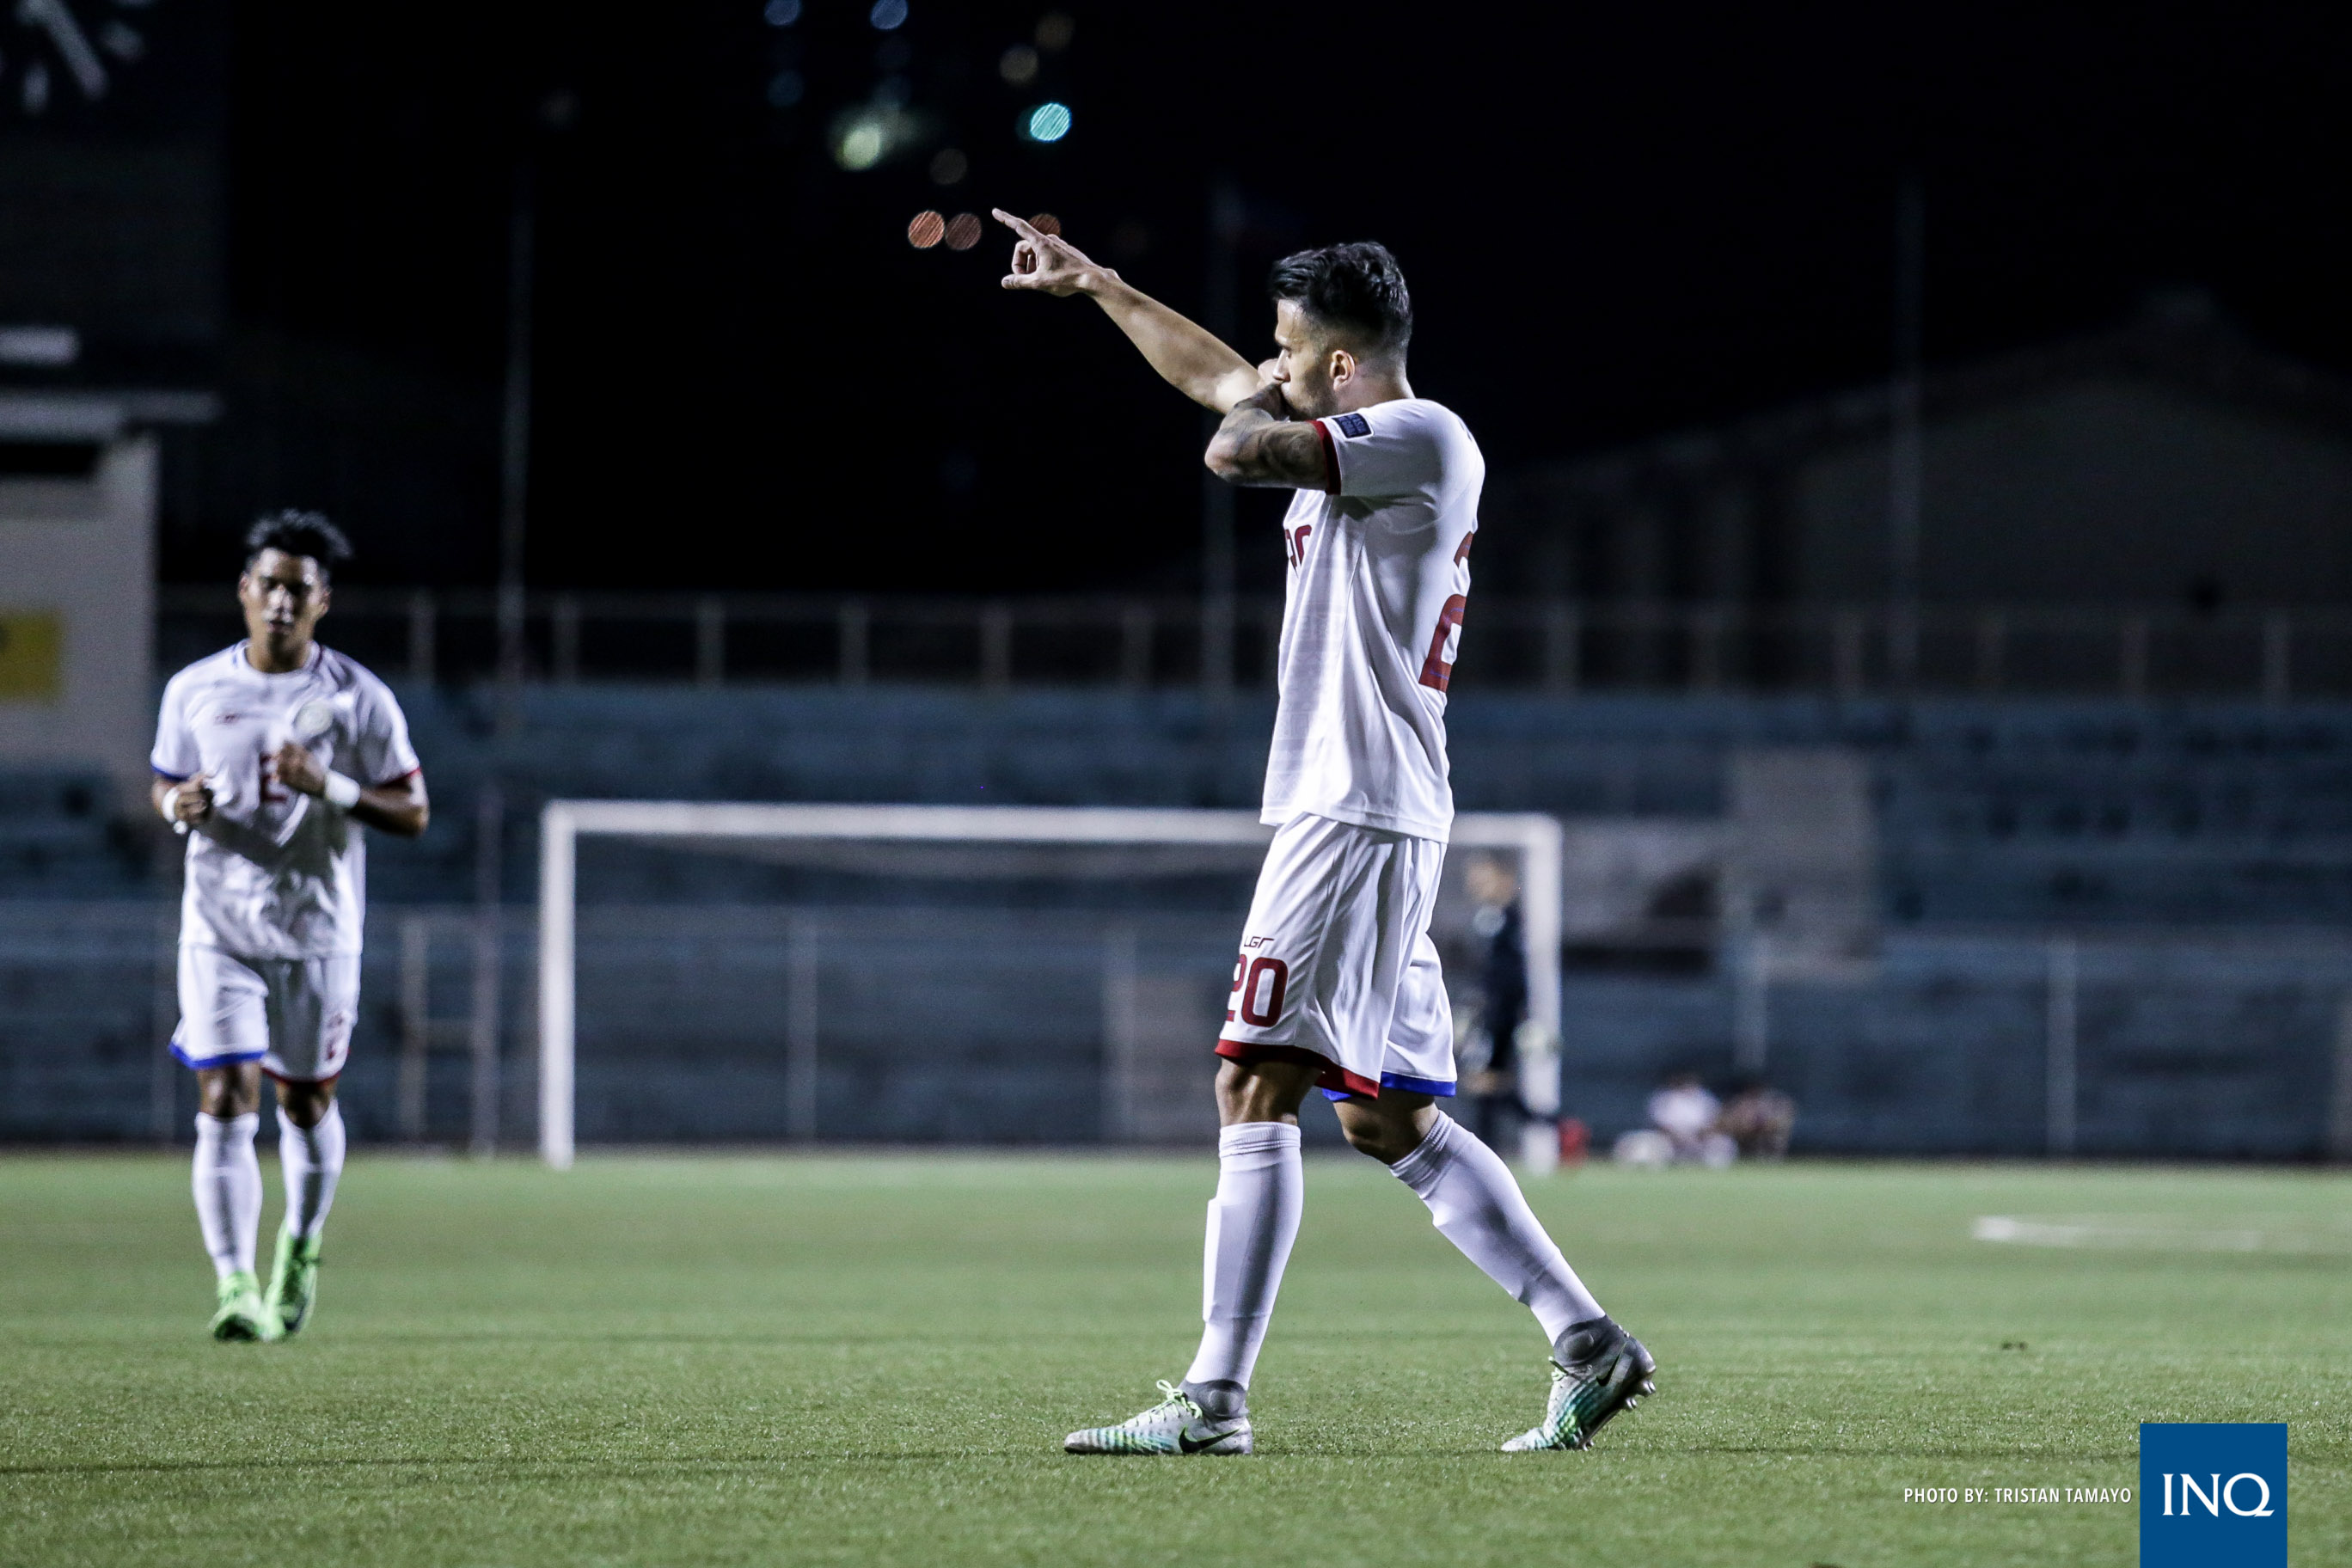 Philippine Azkals vs Nepal in the  2019 AFC Asian Cup qualifiers. Photo by: Tristan Tamayo/Inquirer.net